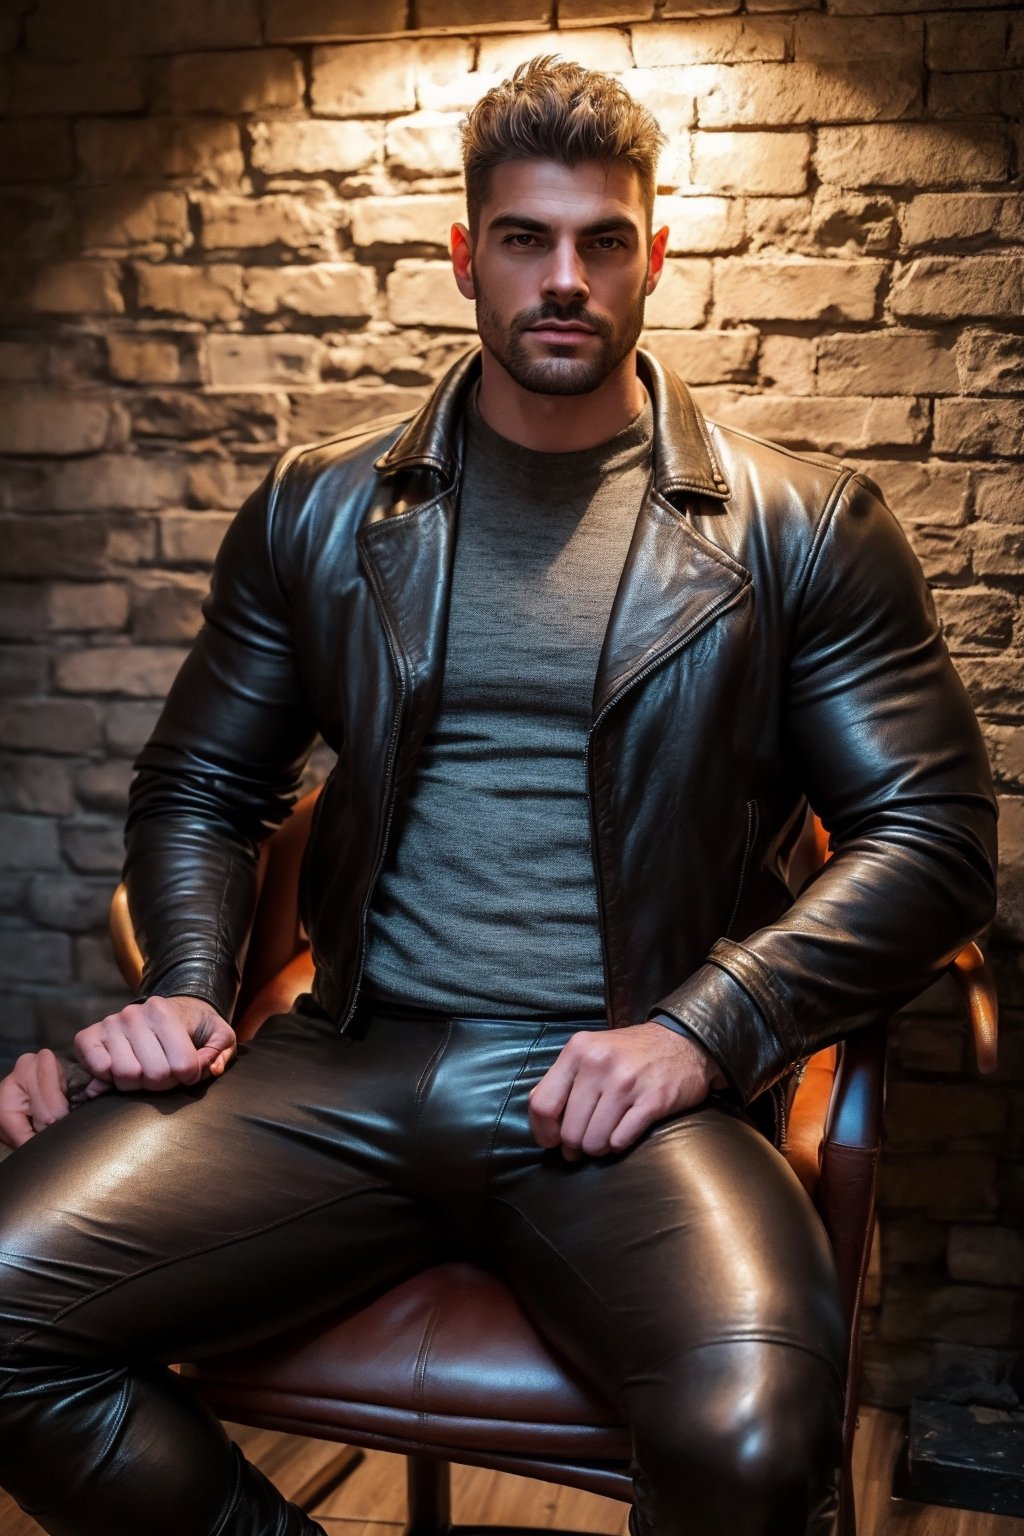 realistic, detailed, extremely detailed, Photorealistic, masterpiece, beautiful lighting, real image, hyperrealistic, 8k, cinematic, best shadow, detailed background, exquisite facial features, full body,


(((( Realistic, The image shows a muscle man sitting in a leather chair. The man is wearing a leather jacket and leather pants and is indoors with a black wall behind them. )))), 

Hyperrealistic photo,realhands, 